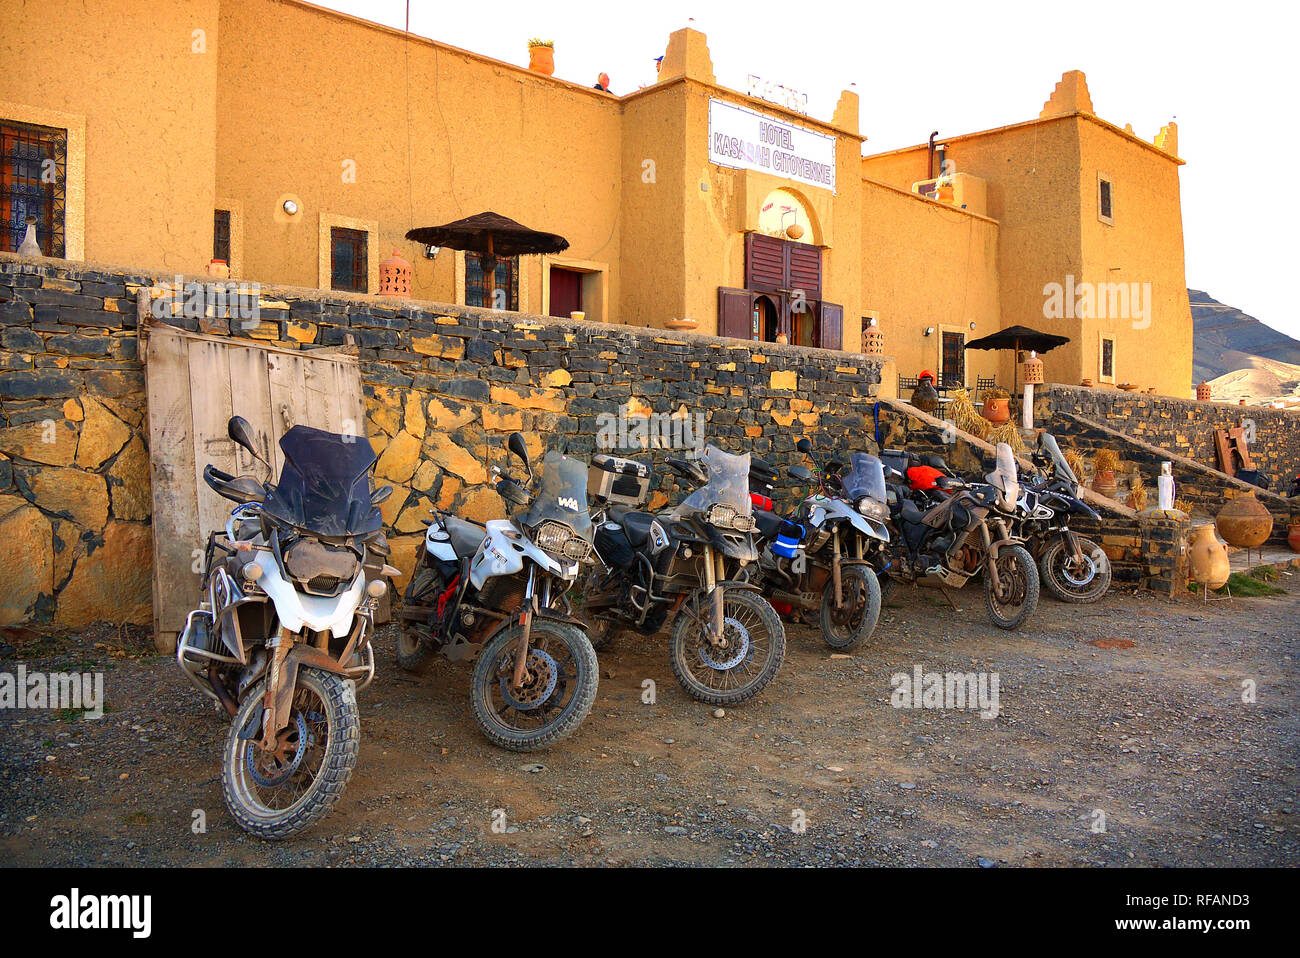 Motorcycle touring in the High Atlas mountains in Morocco. Kasbah Cityonne, Agoudal. Stock Photo